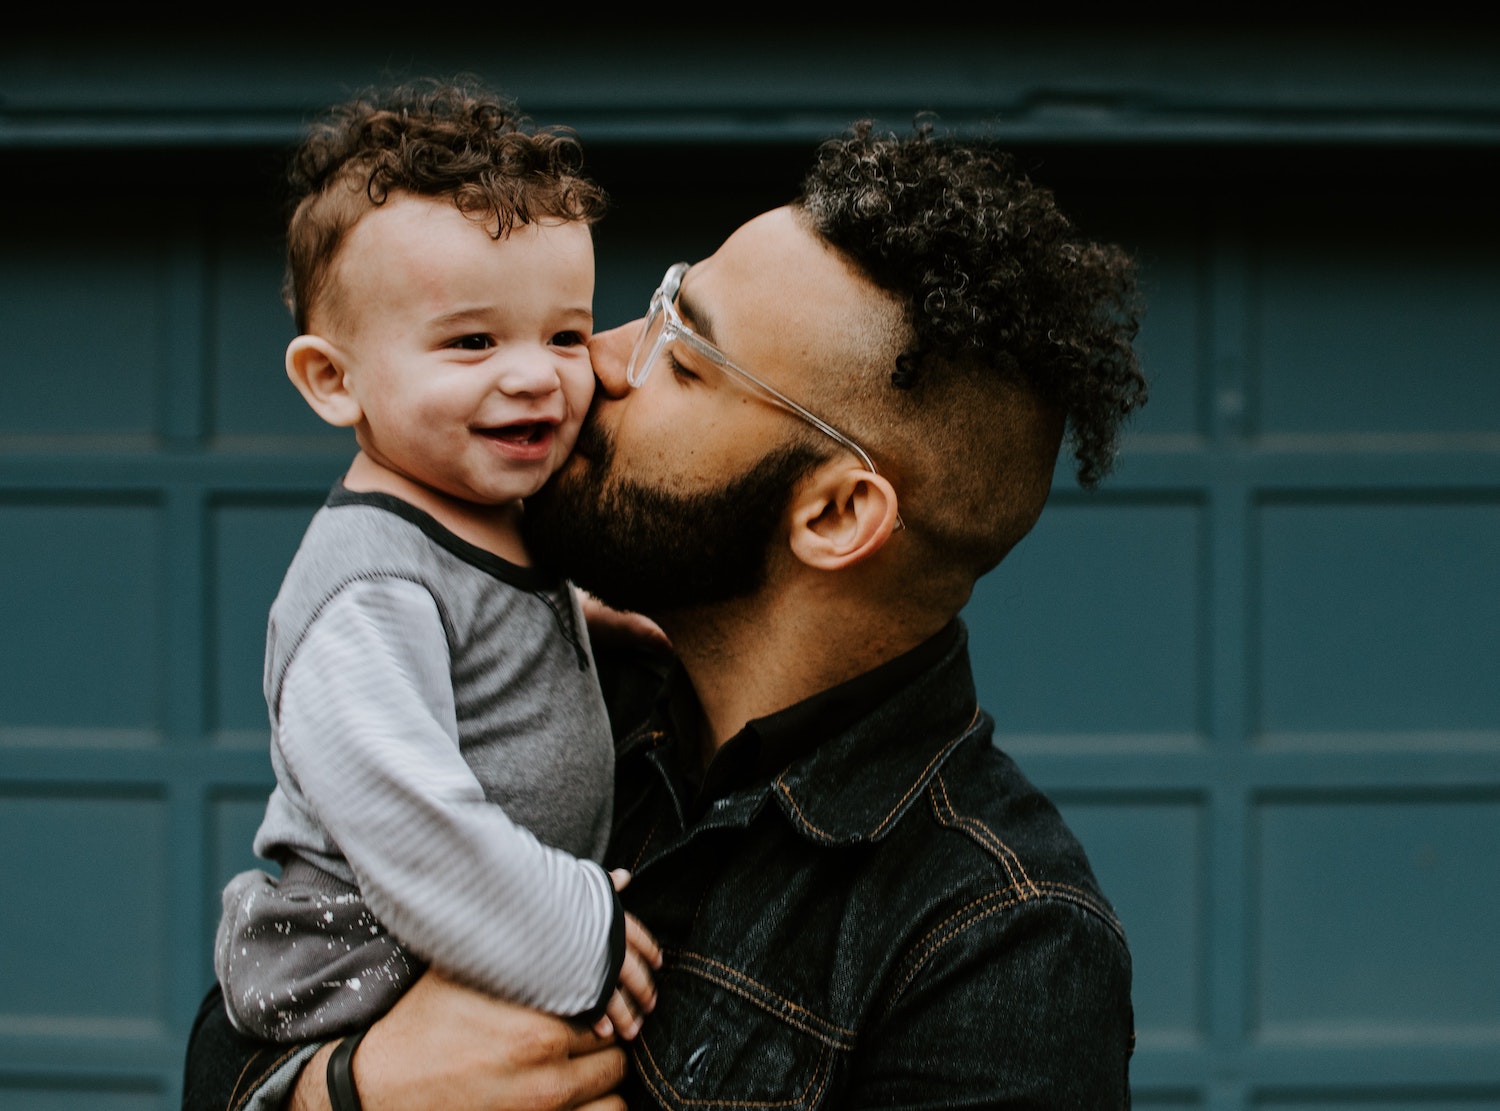 A father with his son thanks to the help of his child custody lawyer.